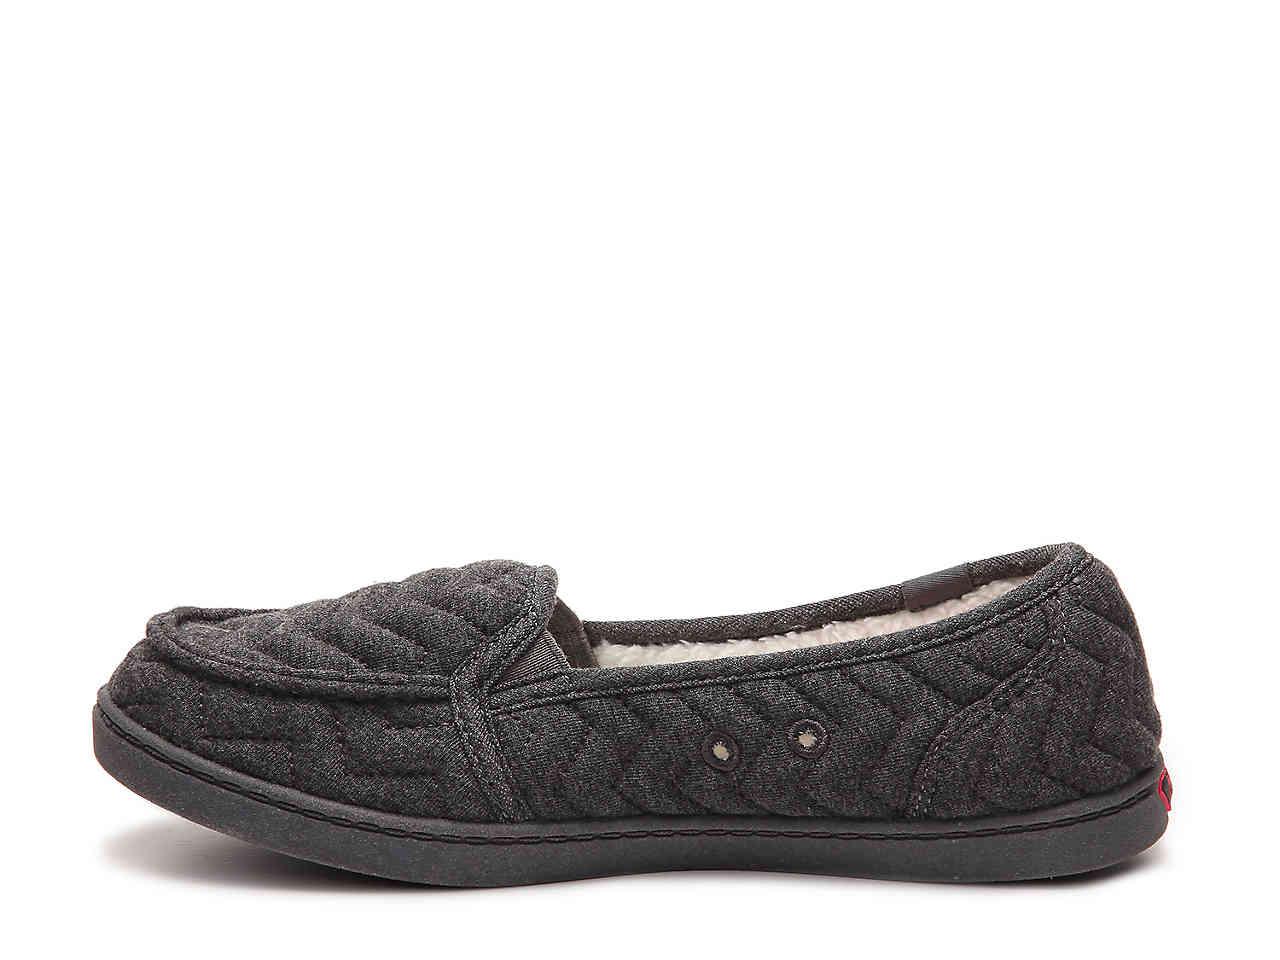 Roxy Minnow Quilted Sport Flat in Grey 